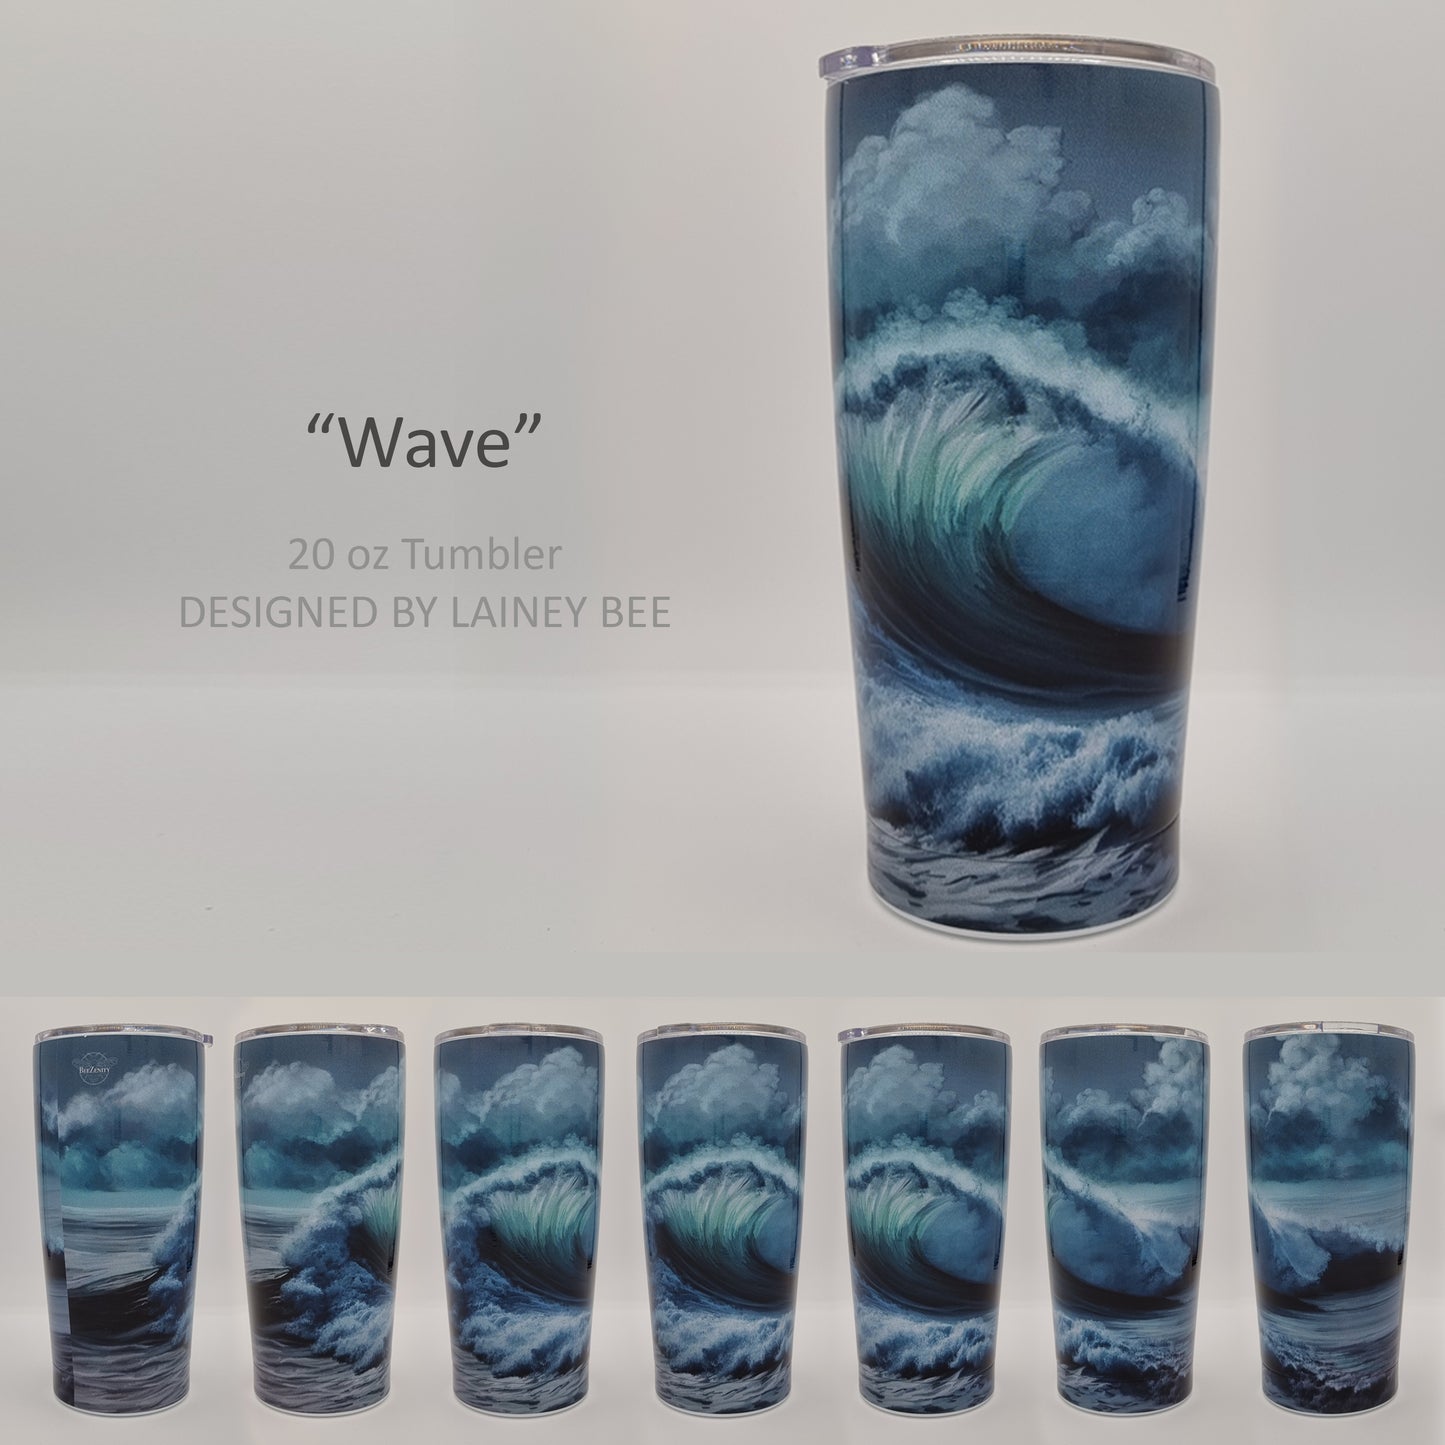 20 oz tumbler with wave